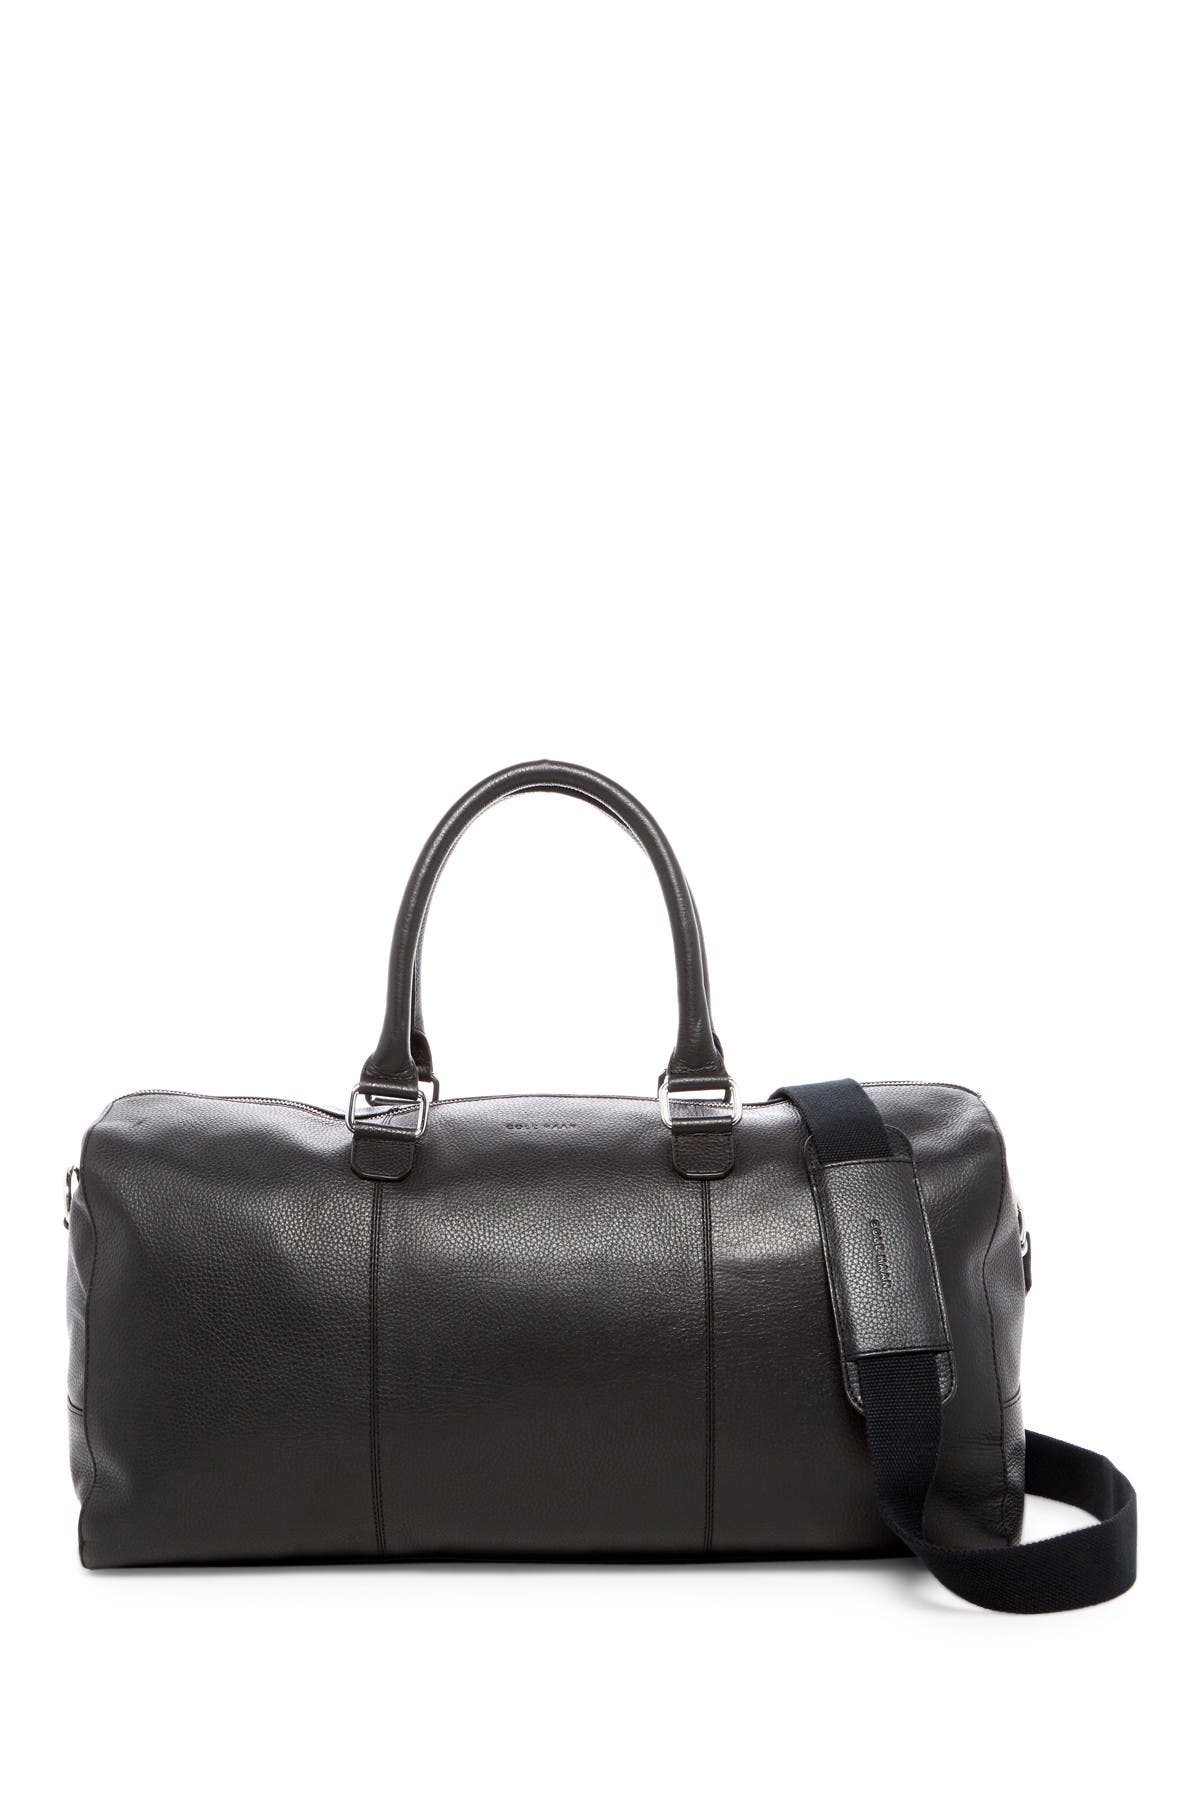 Cole Haan | Leather Duffel Bag 